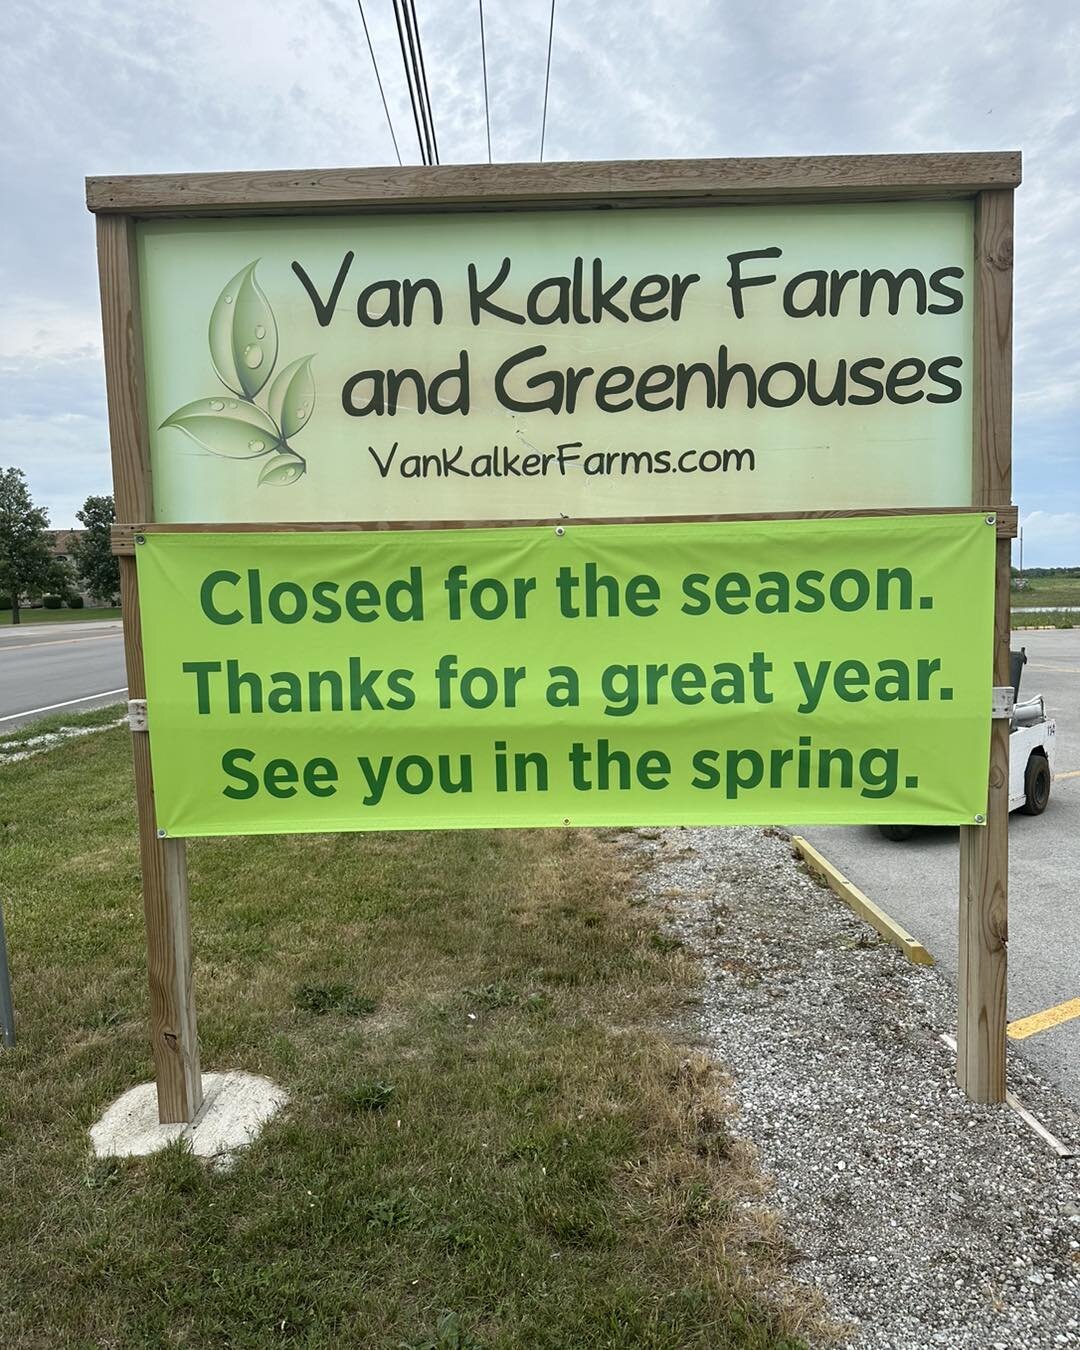 From the Van Kalker family, I want to say a great big thank you to our awesome customers. Supporting local and family-owned businesses is important, and we appreciate all our customers, whether you were here for the first time this year or back for t